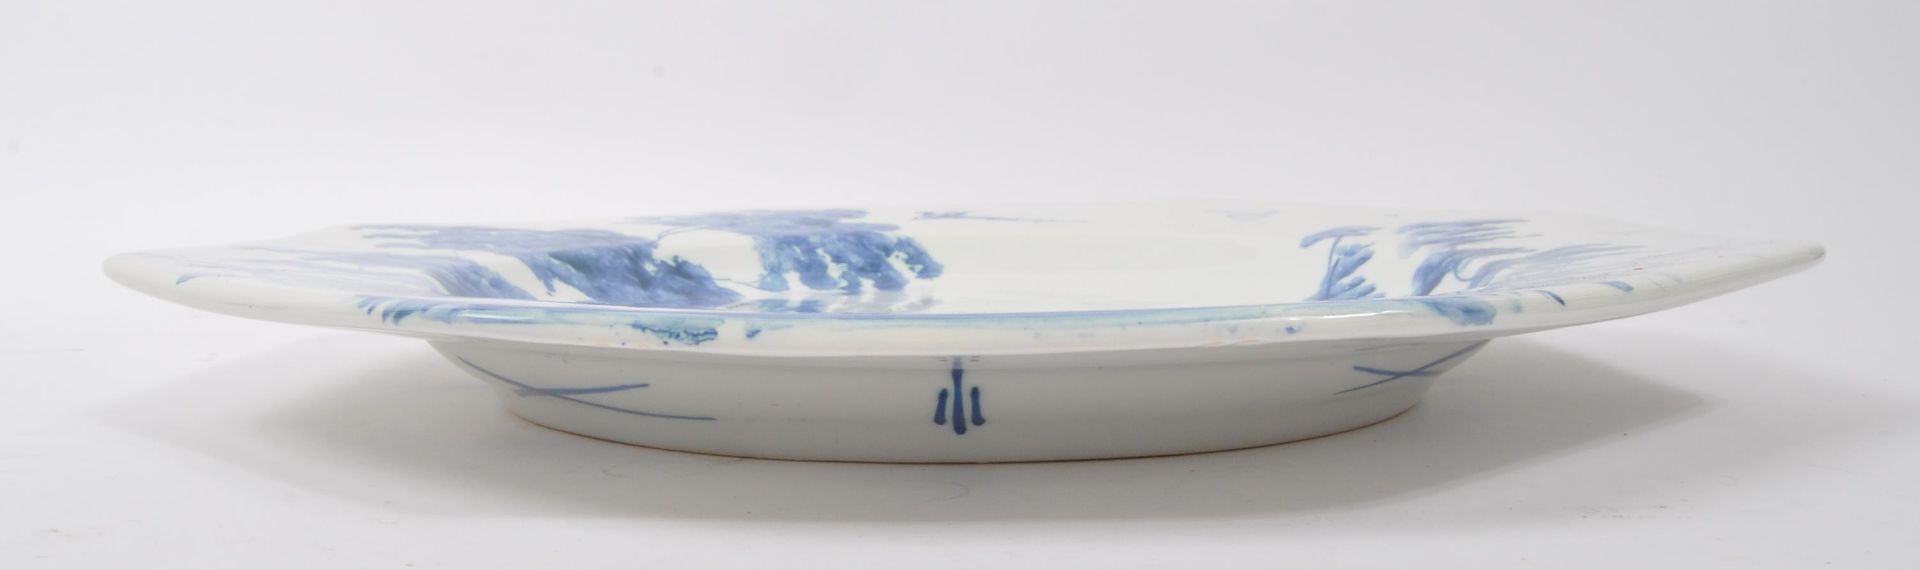 ISIS POTTERY - DEBORAH SEARS - STUDIO ART POTTER CHARGER PLATE - Image 5 of 5